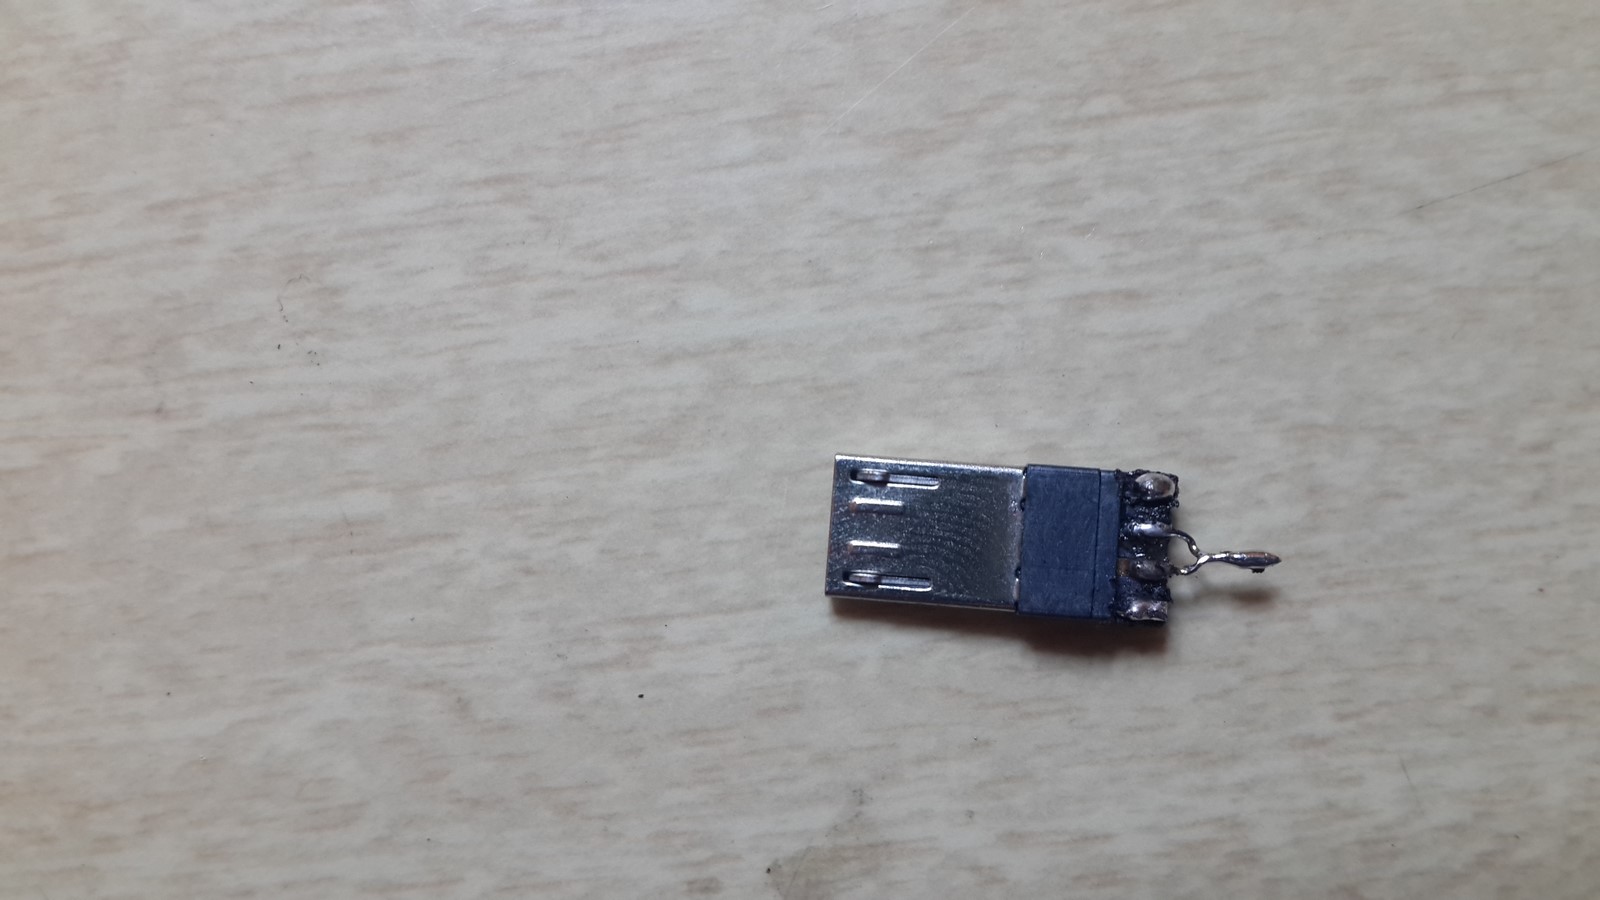 USB micro connector solder data pins